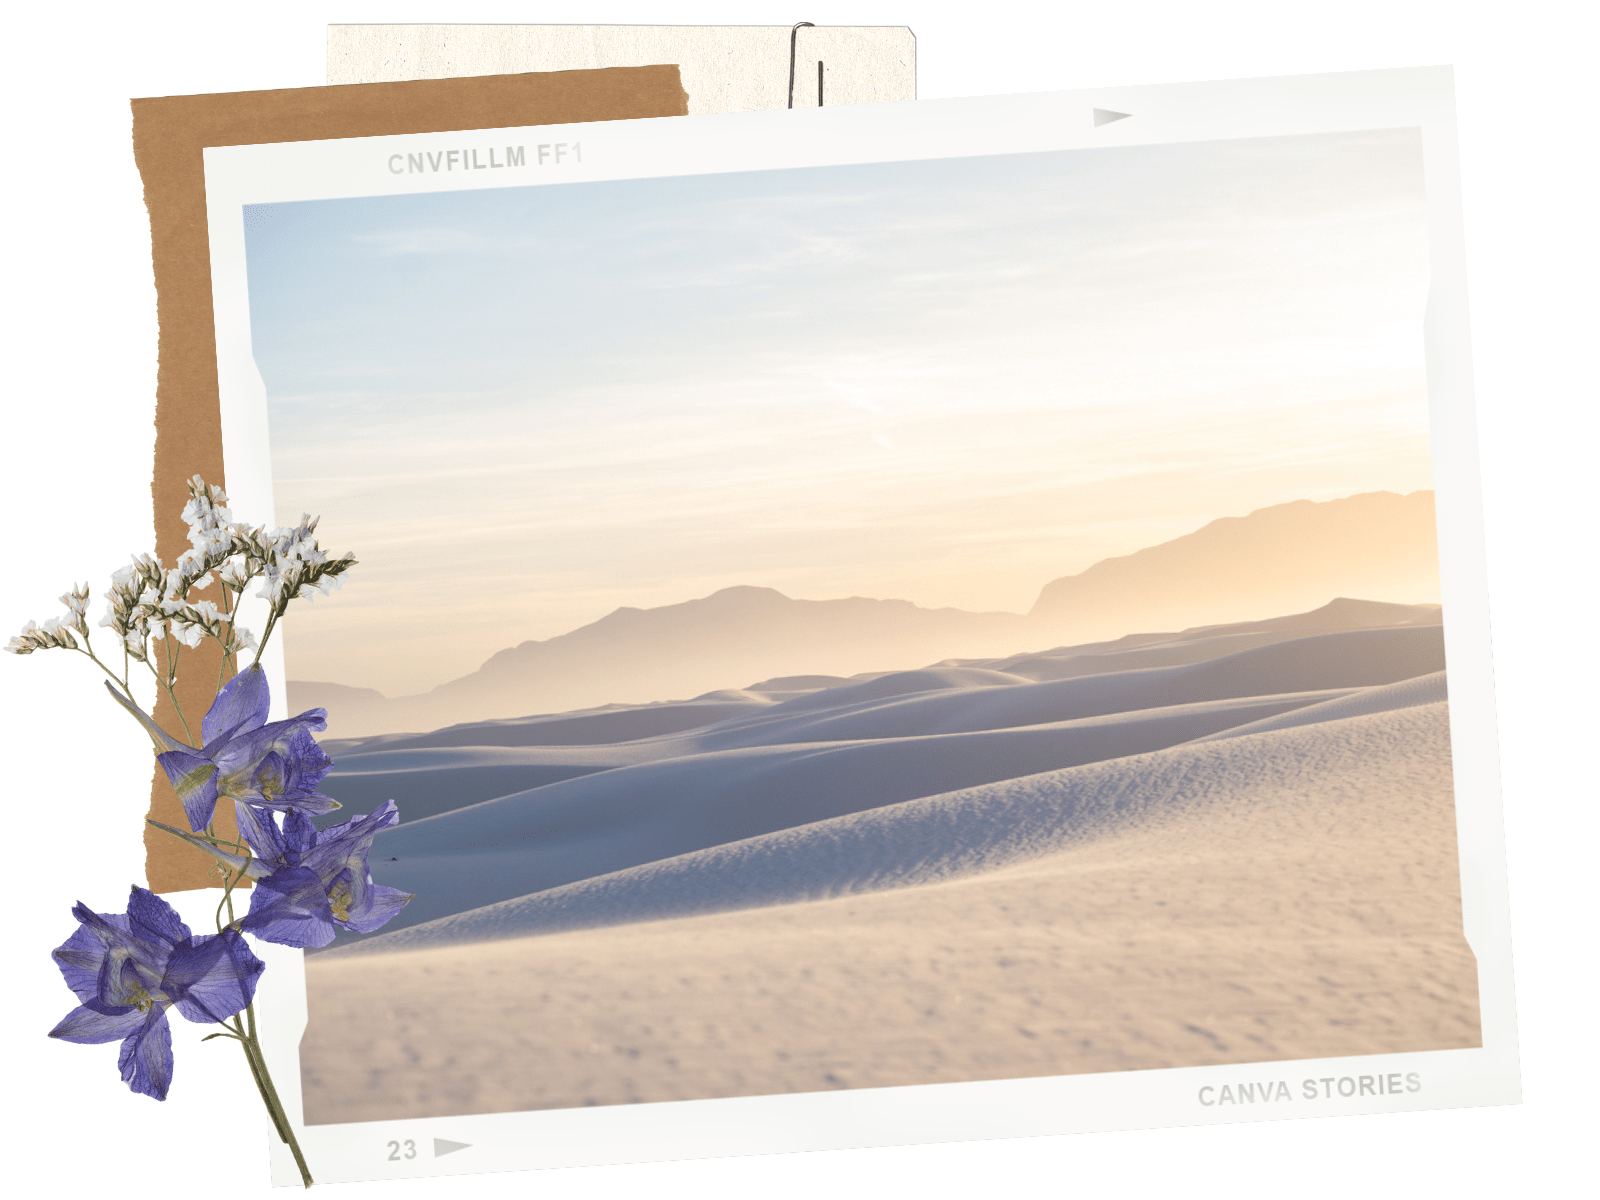 White Sands National Park in New Mexico: About